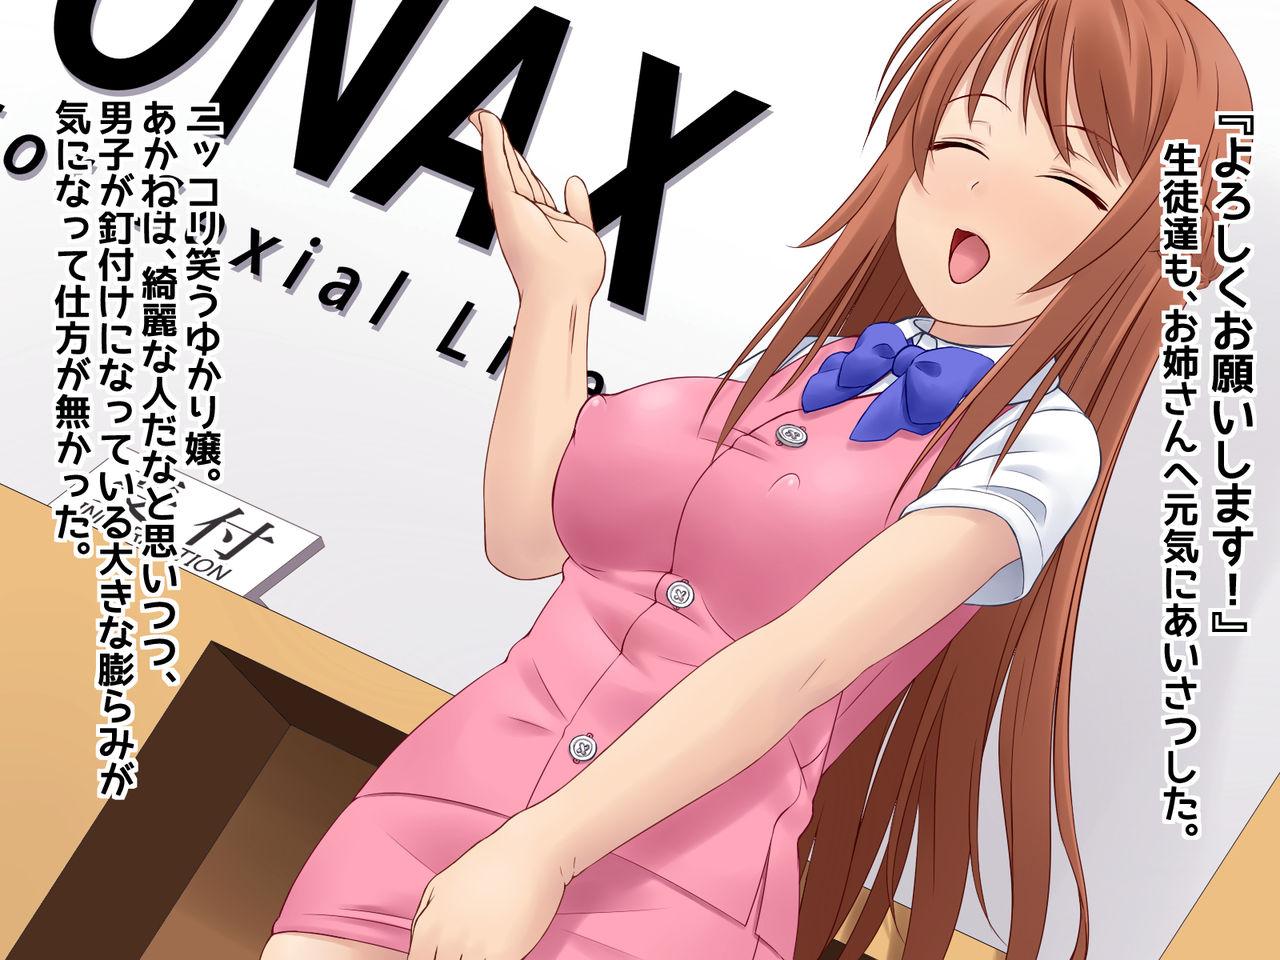 I ... become a meat urinal! Poor females are fallen into a semen processing hole and happy ending ♪ 2